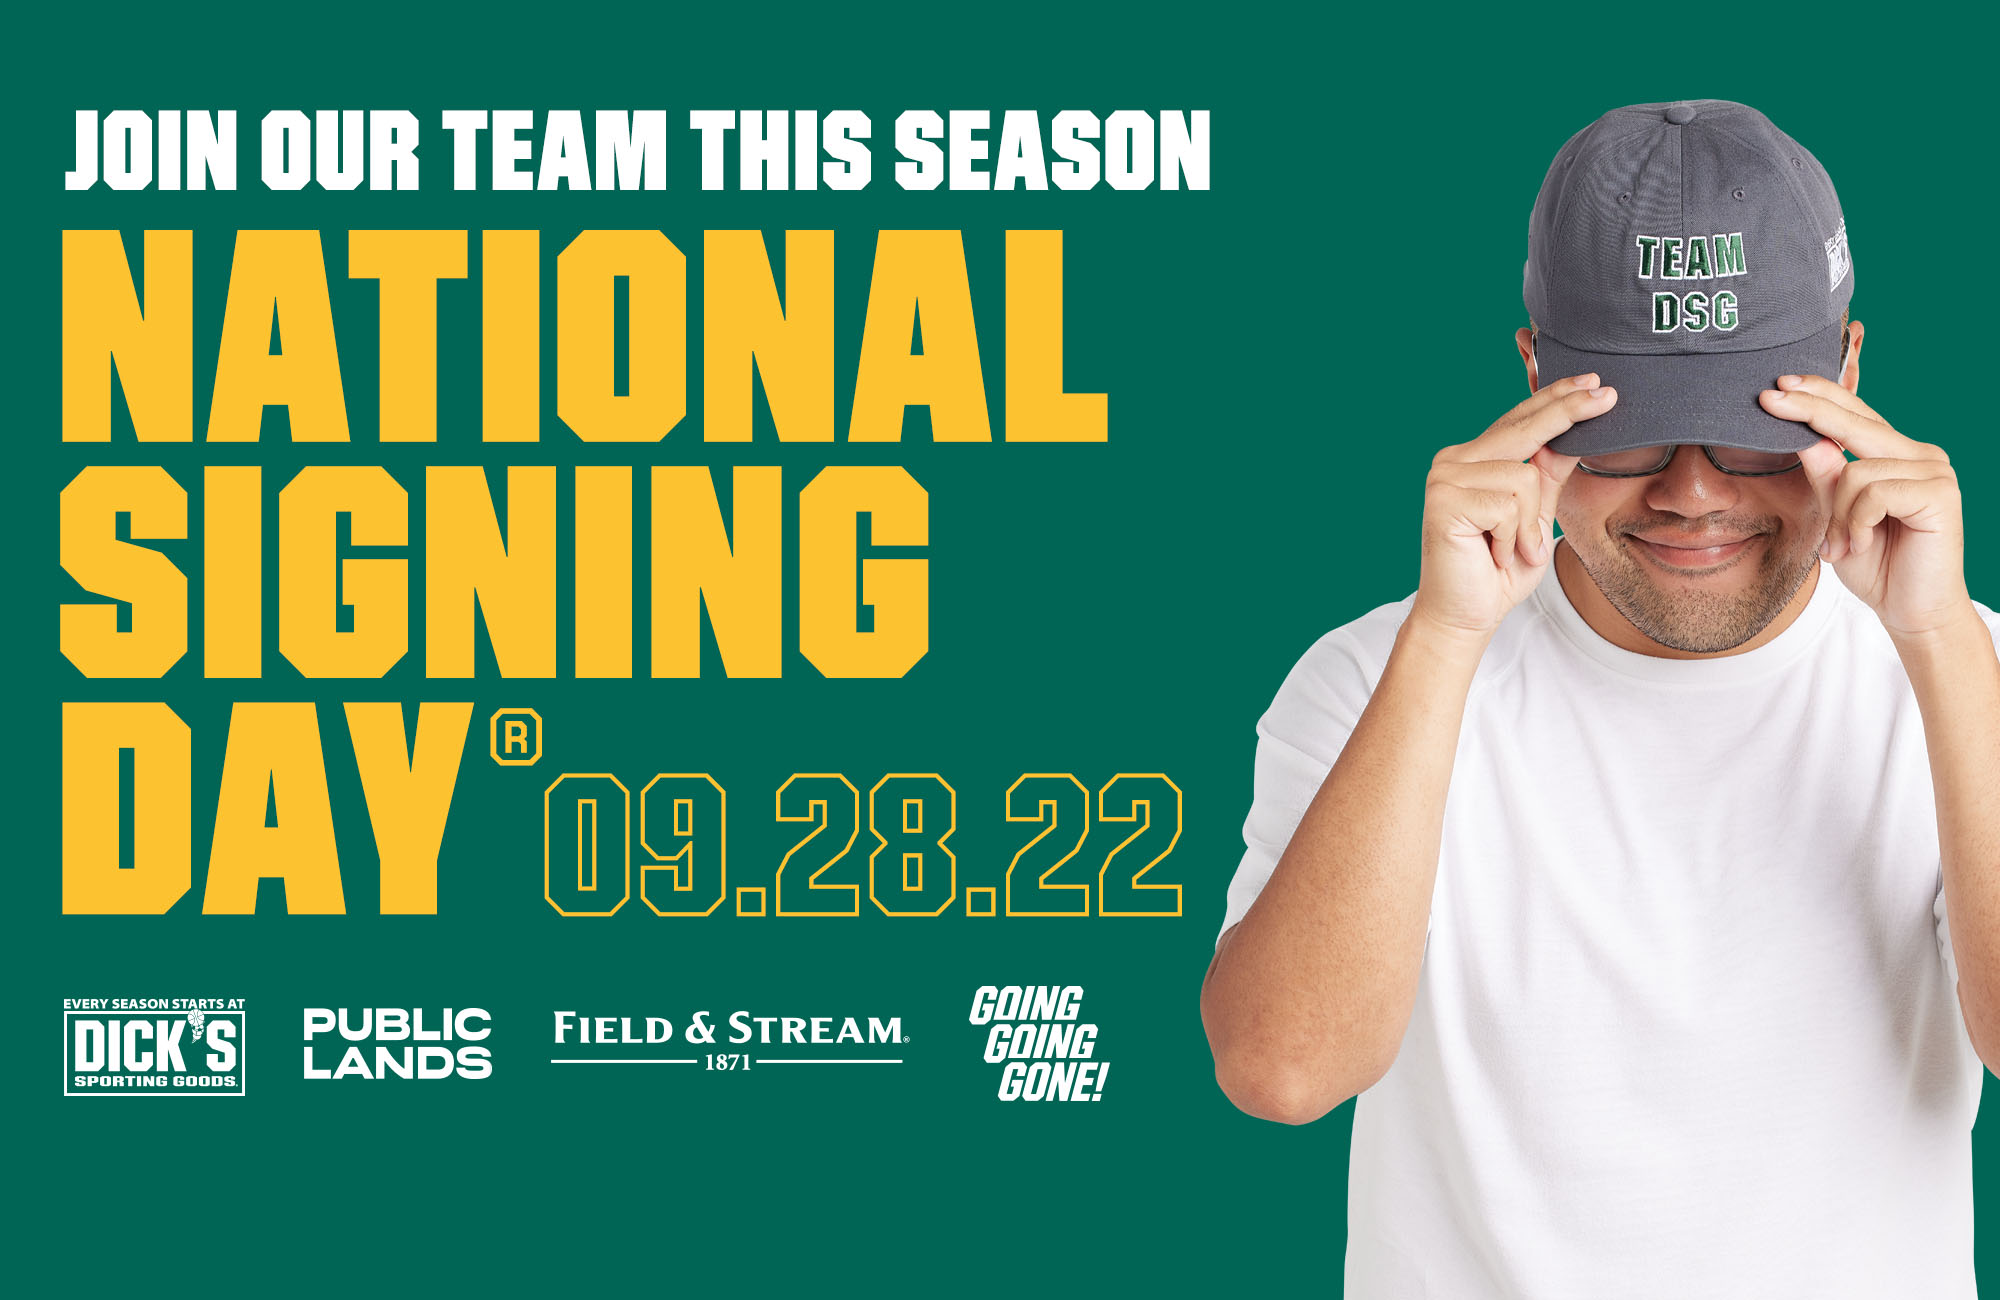 DICK'S Sporting Goods to Begin Holiday Hiring with National Signing Day® on September 28